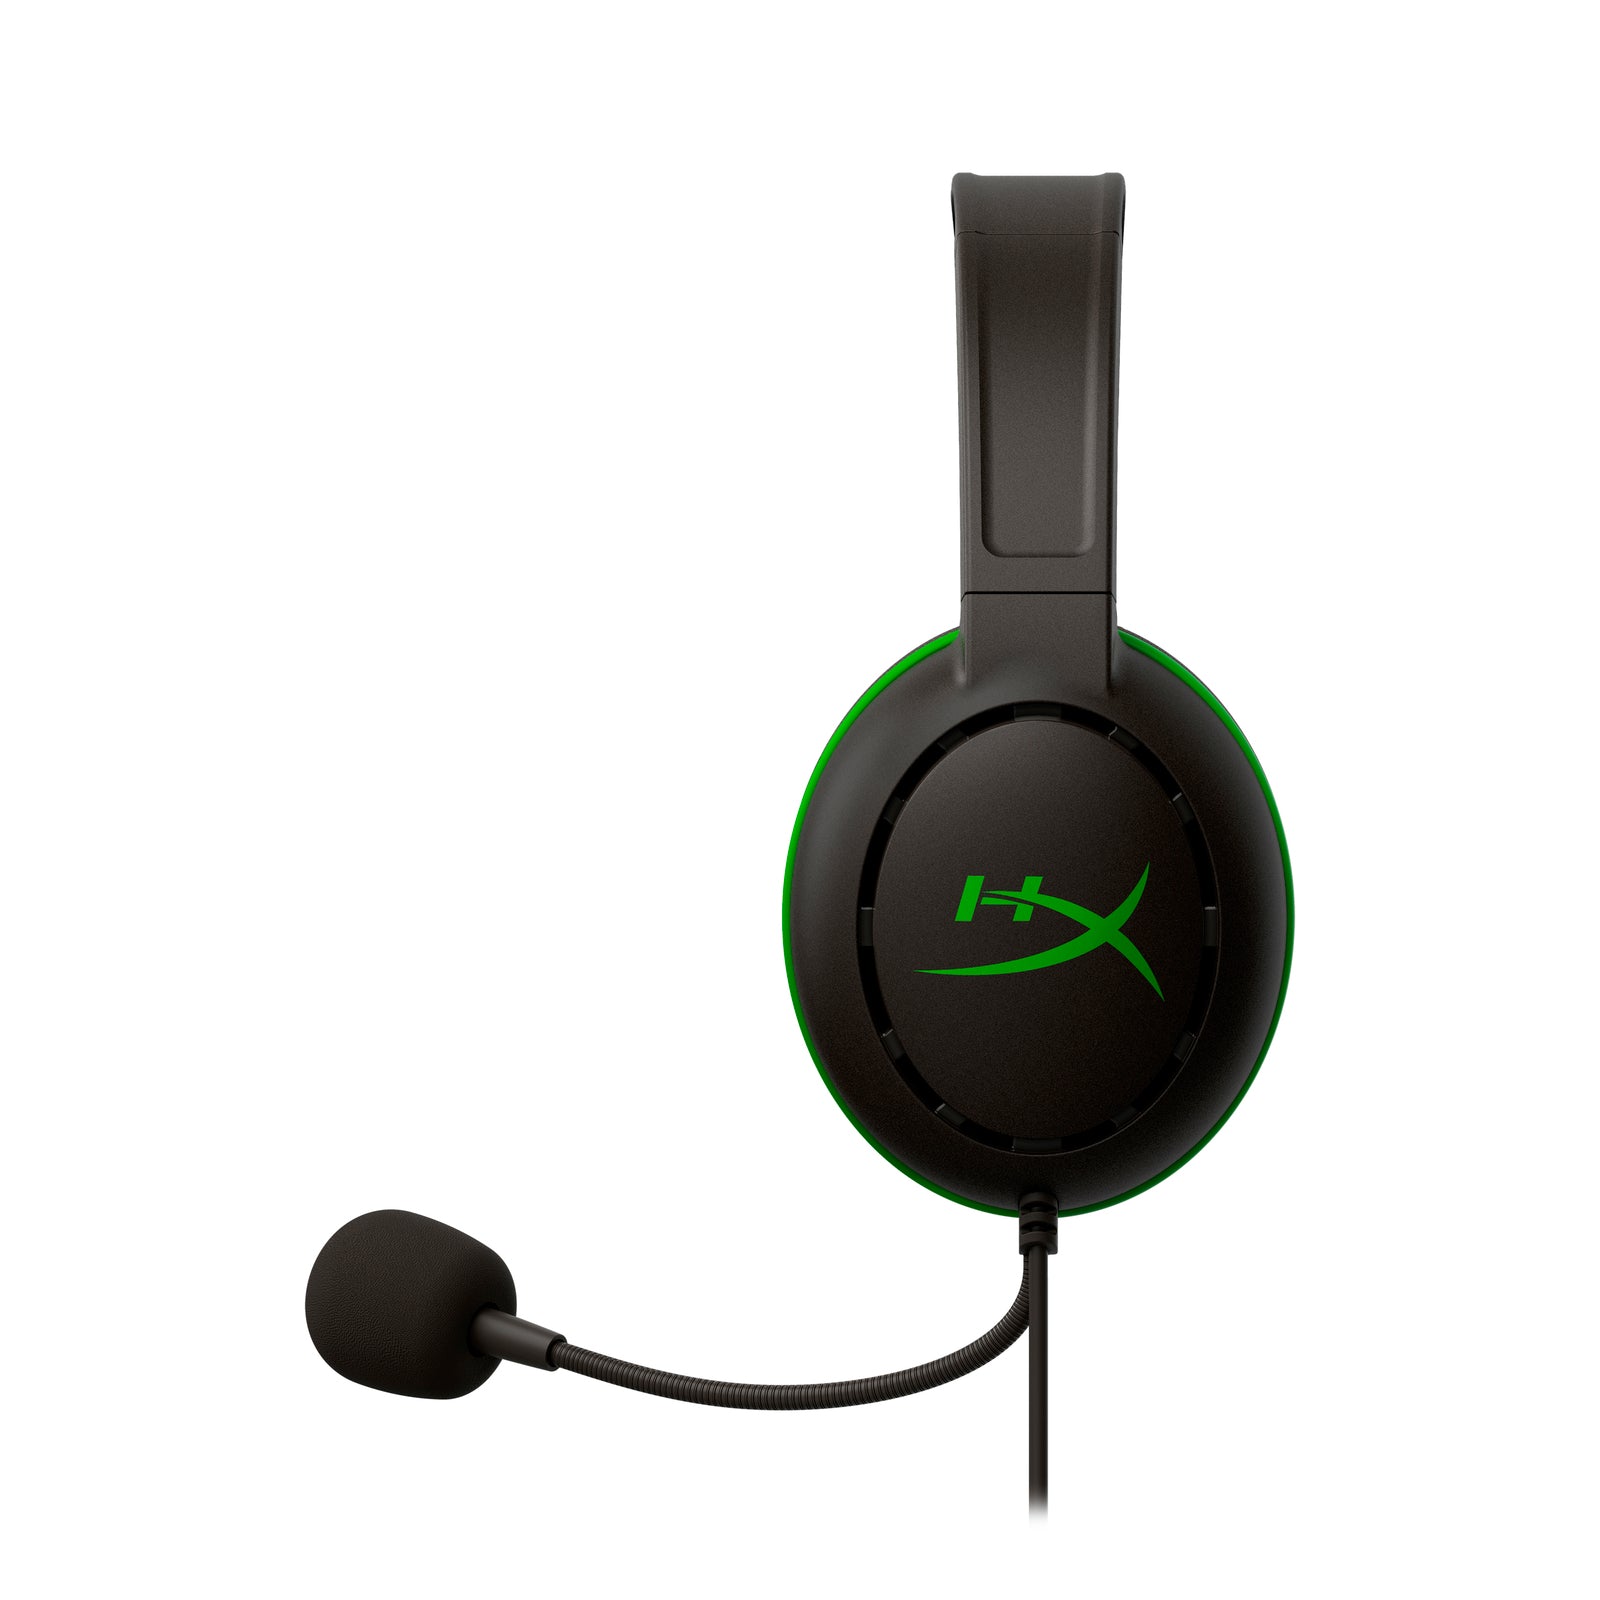 CloudX Wired Gaming Headset for Xbox One and Xbox Series X